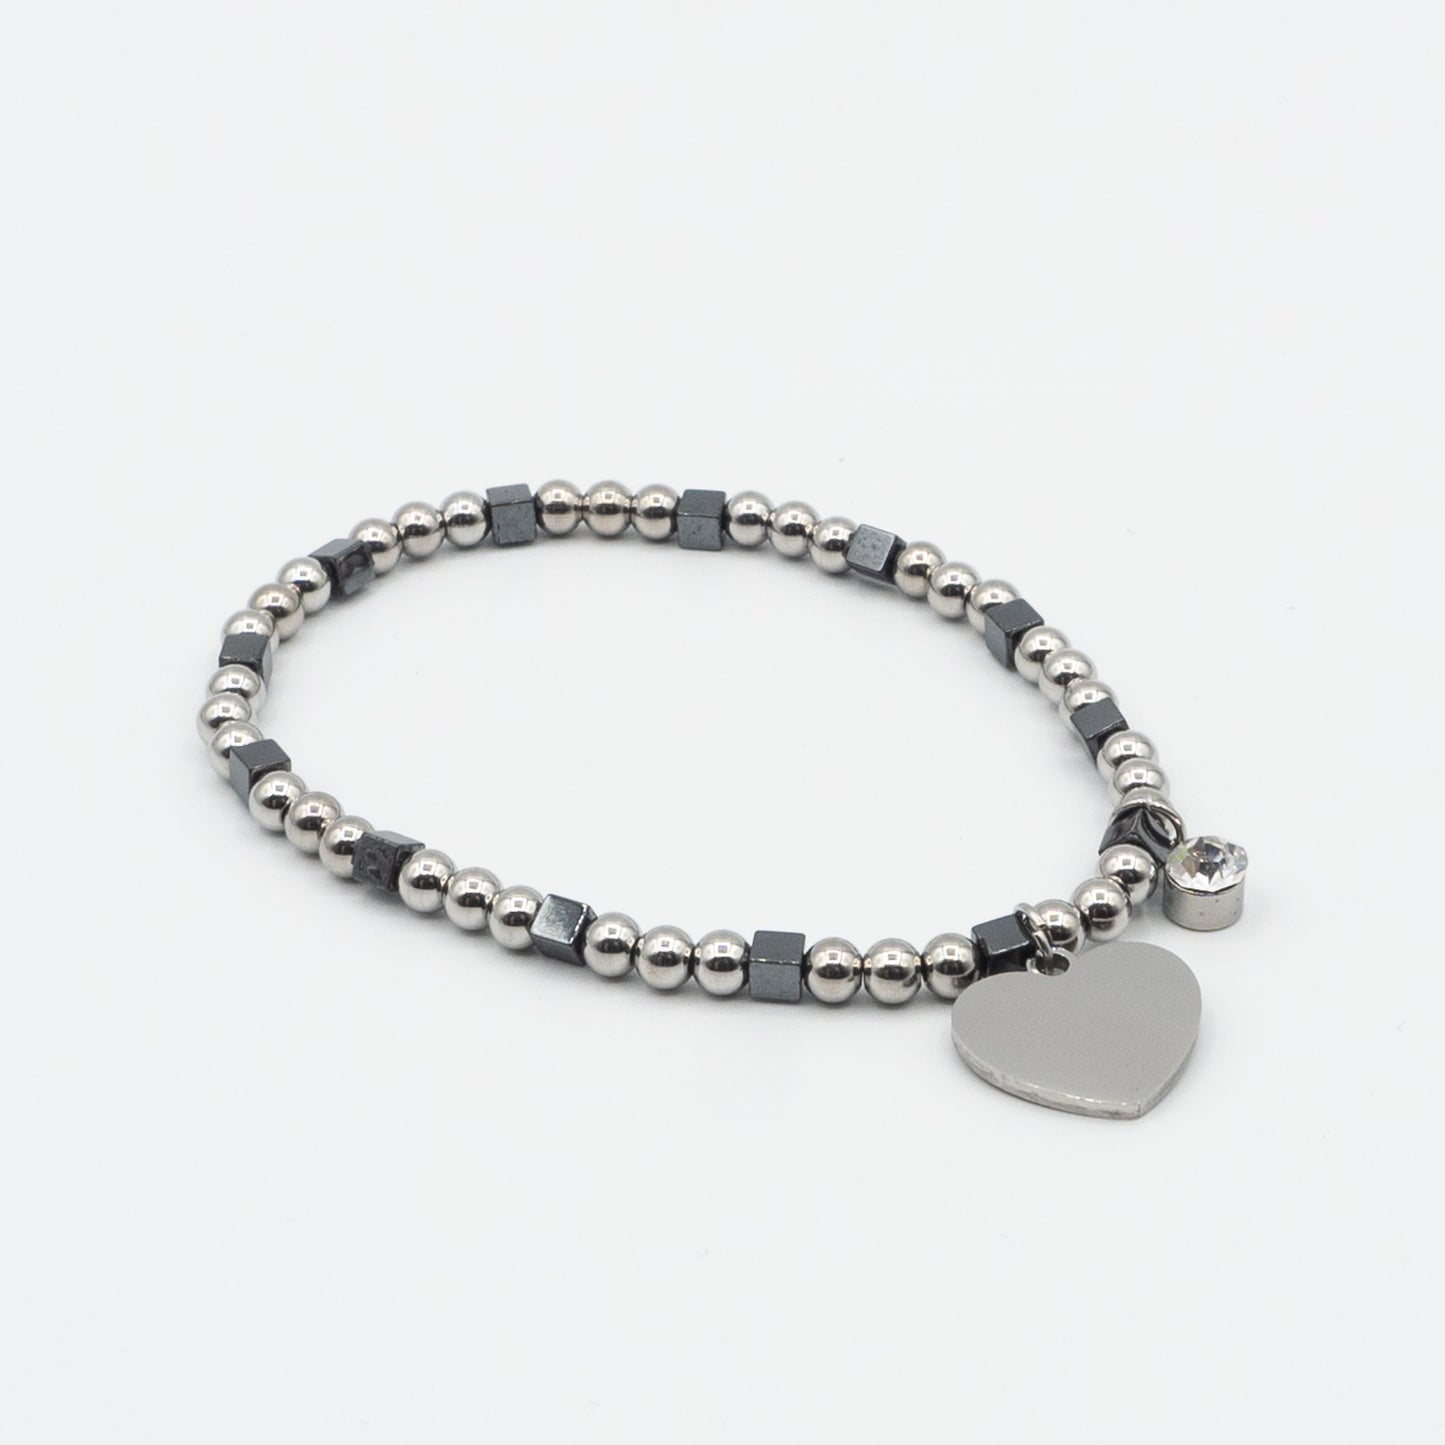 ELENA - stainless steel and hematite bracelet with heart